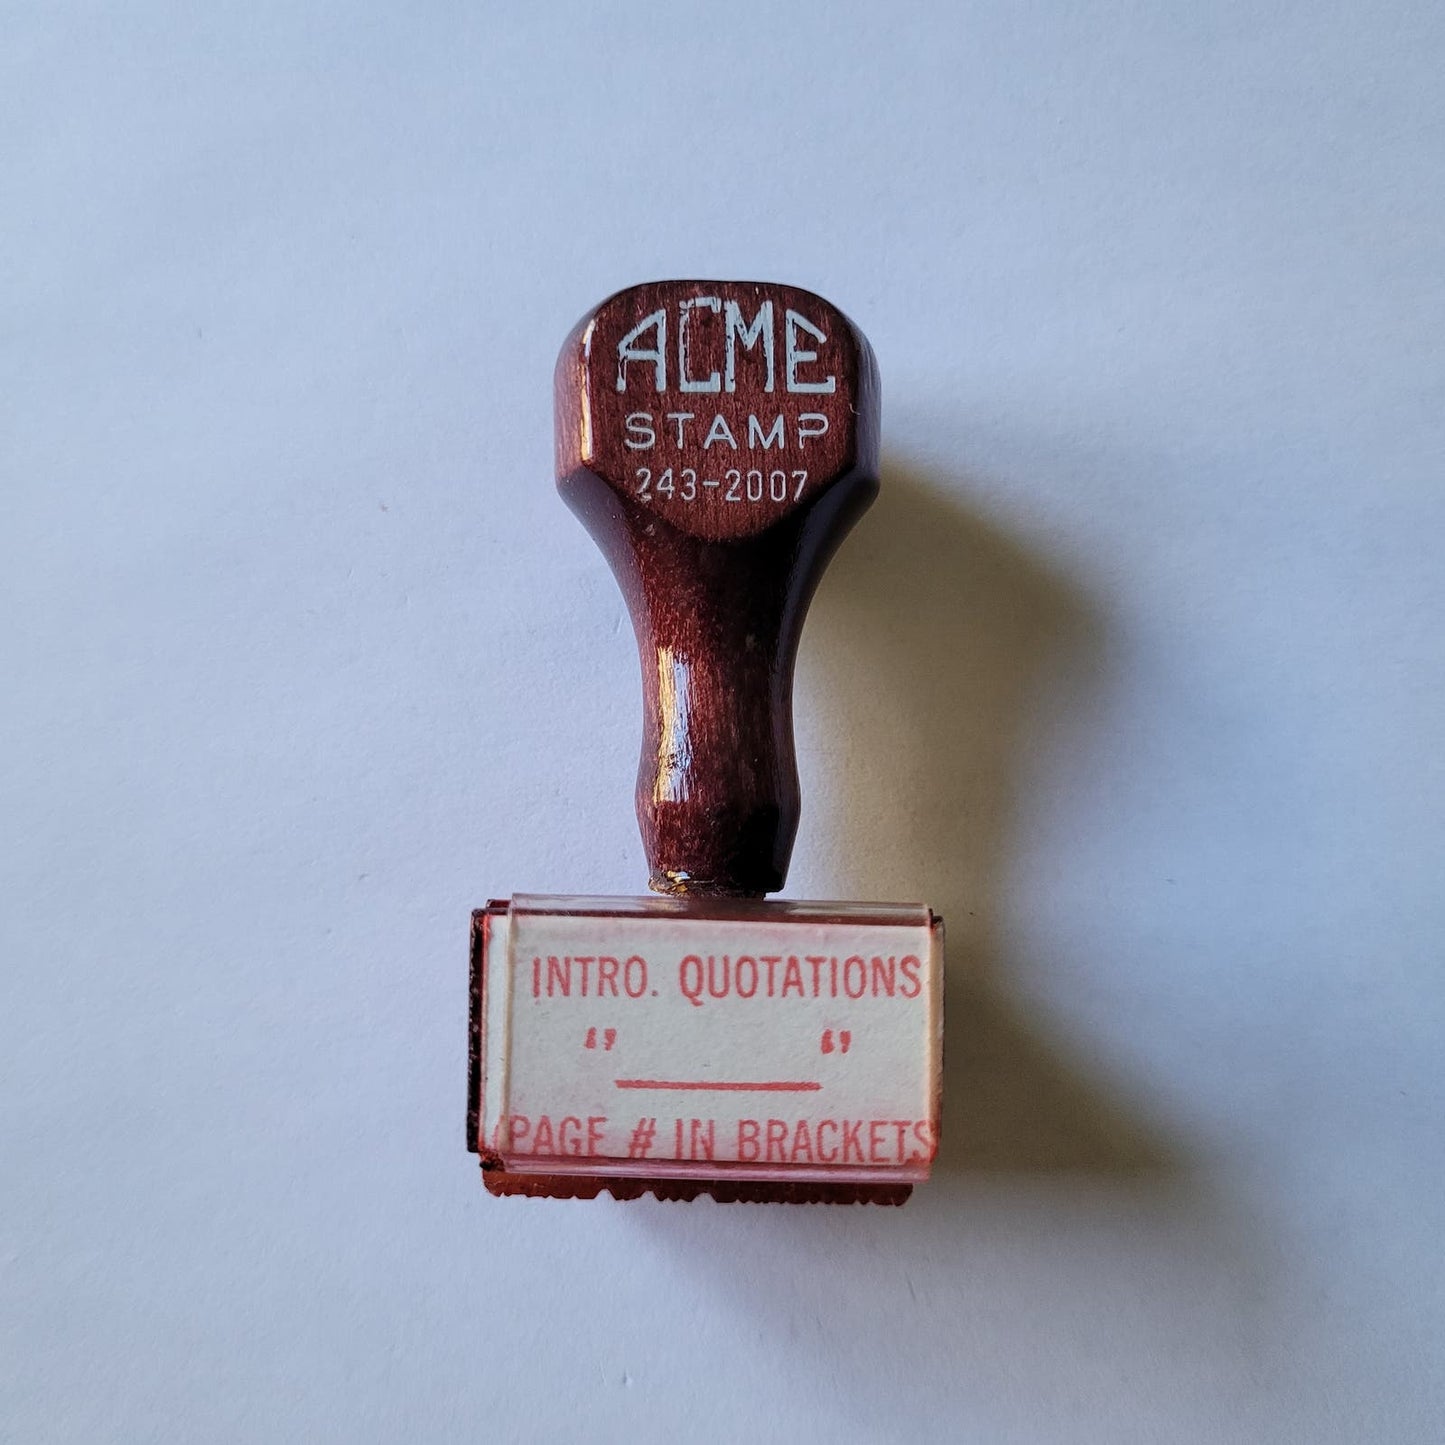 Vintage ACME Rubber Stamp - Intro. Quations "_____" Page # in Brackets